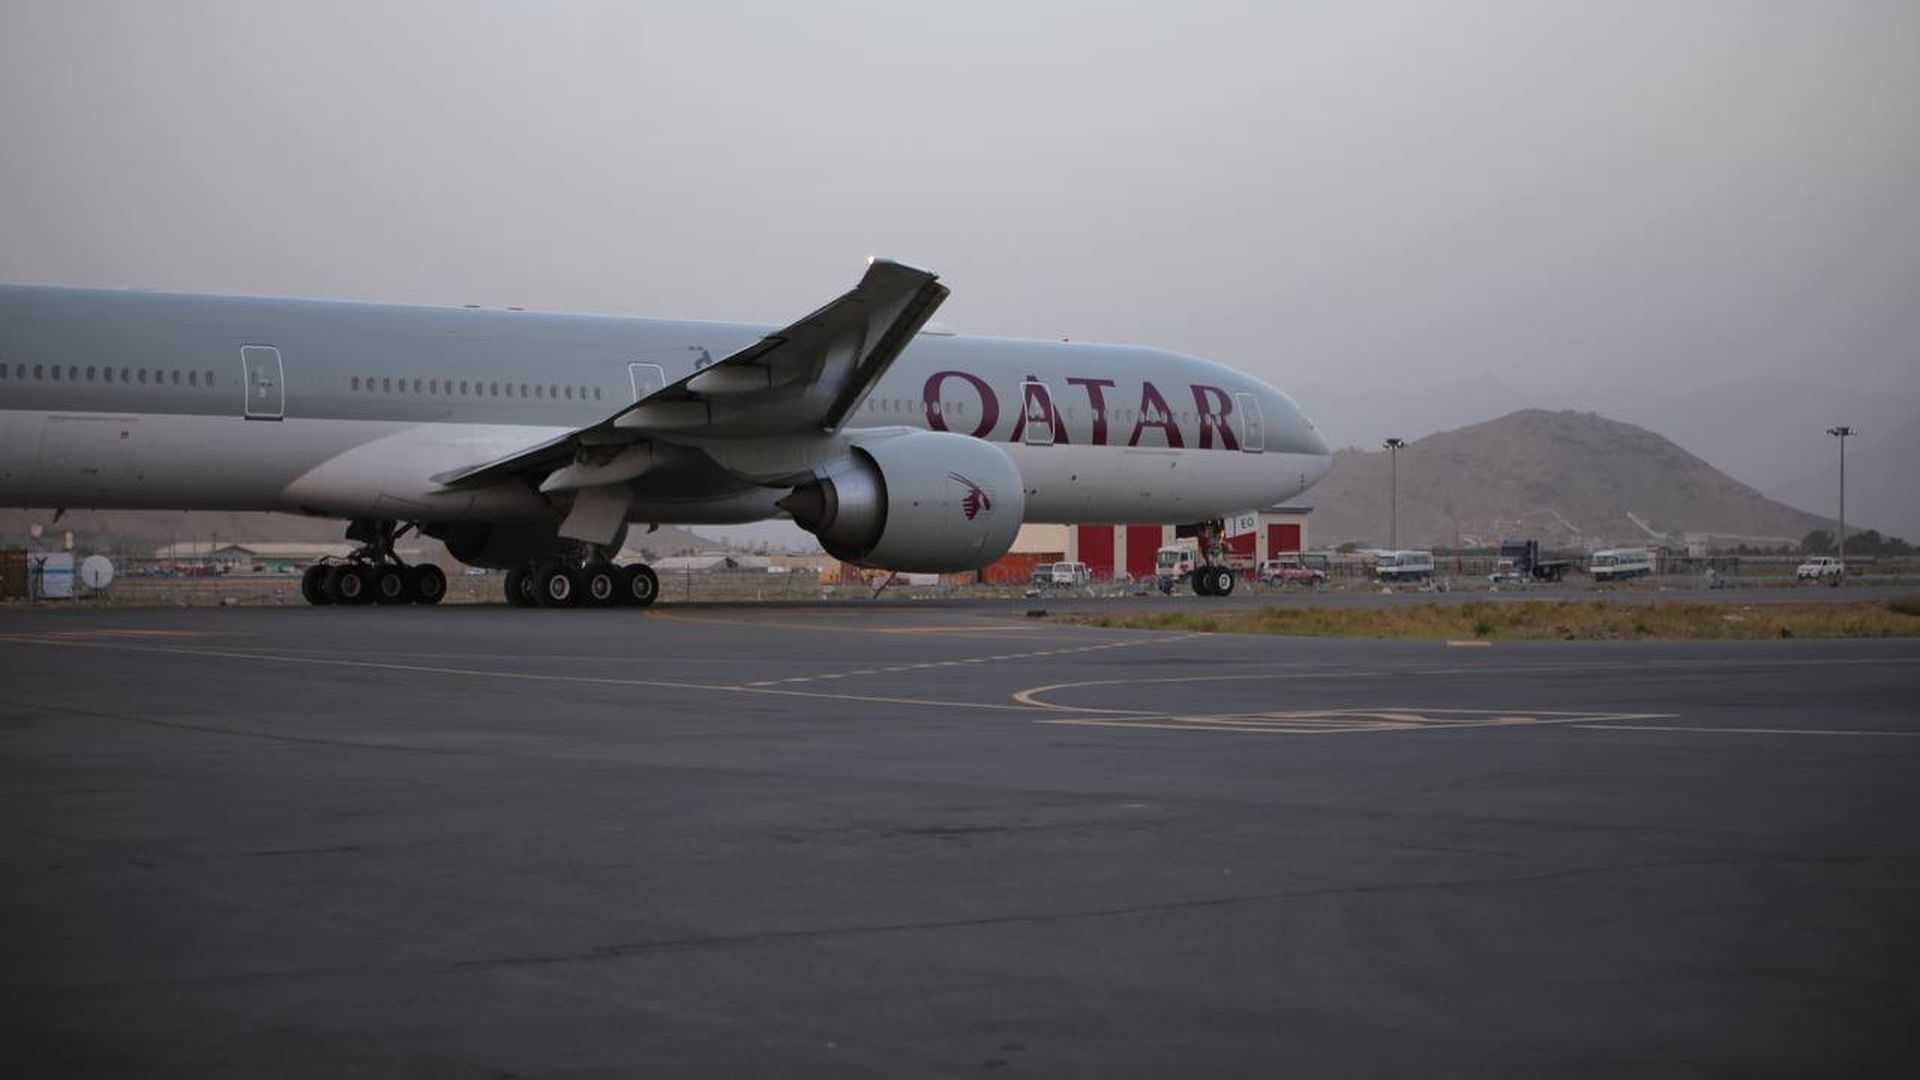 An Airplane belongs to Qatar carrying 150 people, including US and Canadian citizens departs for Qatar's capital Doha from Hamid Karzai International Airport, in Kabul, Afghanistan .